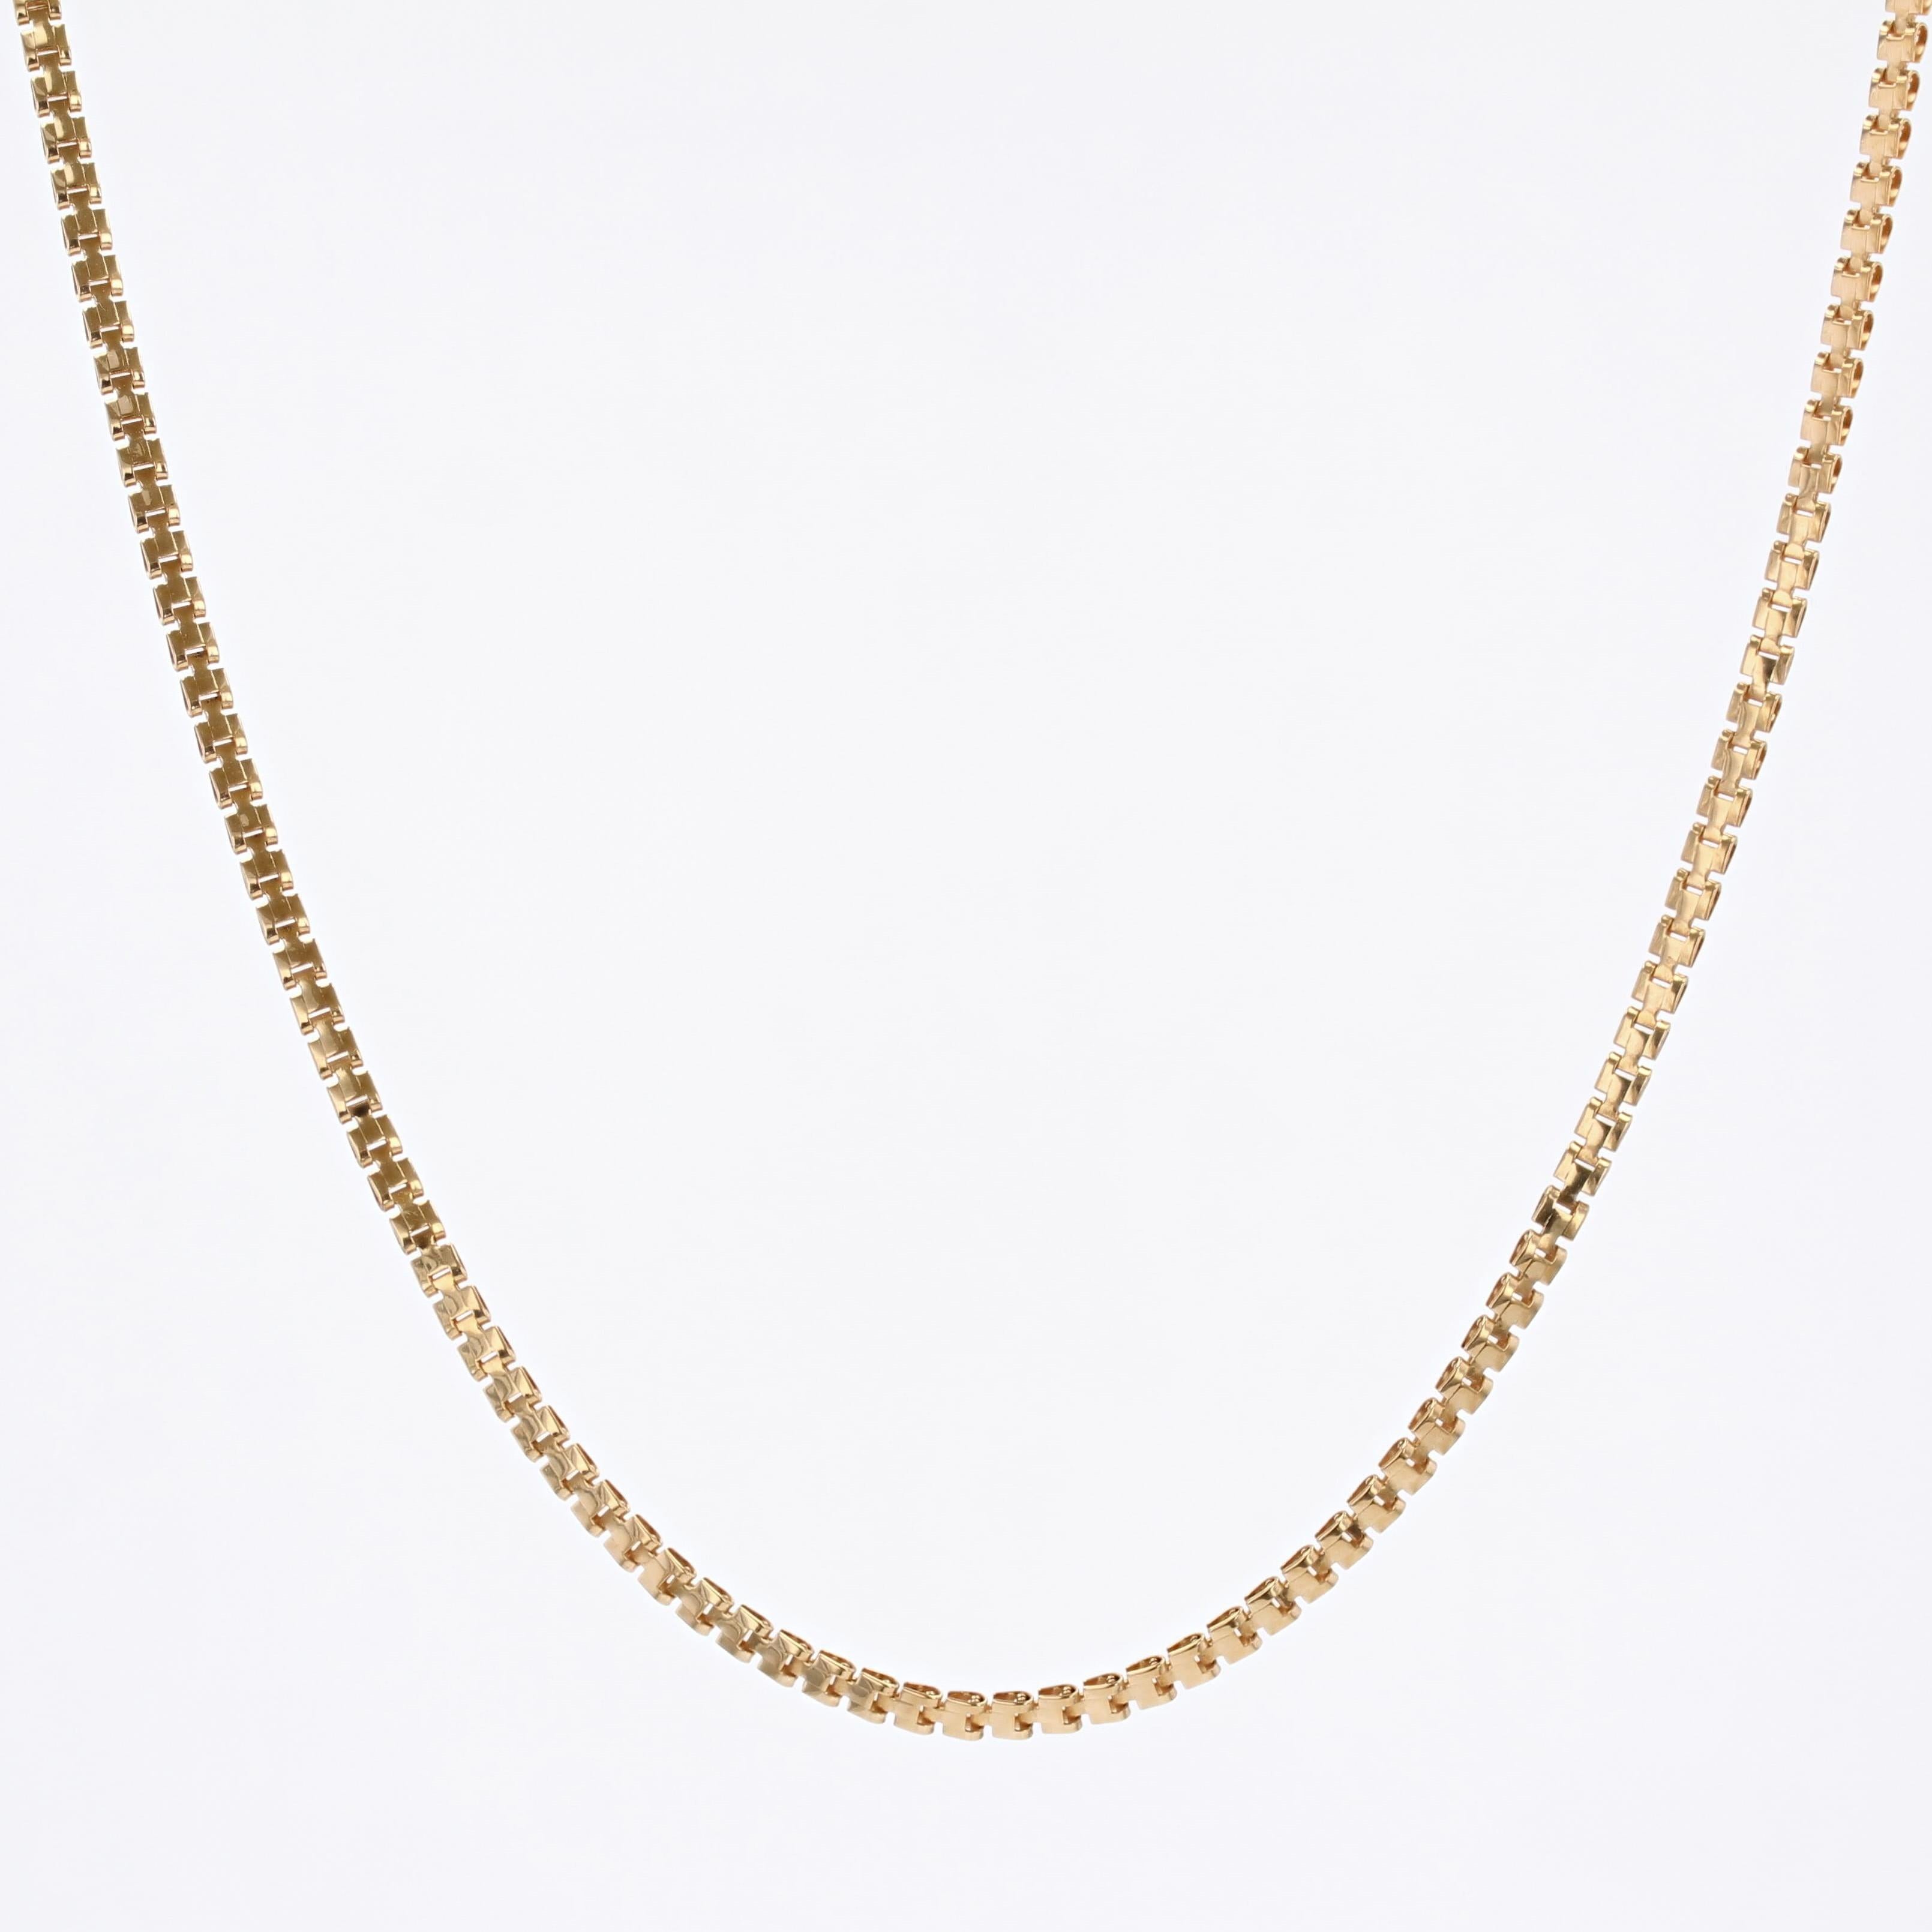 French 1960s 18 Karat Yellow Gold Y Mesh Chain For Sale 1